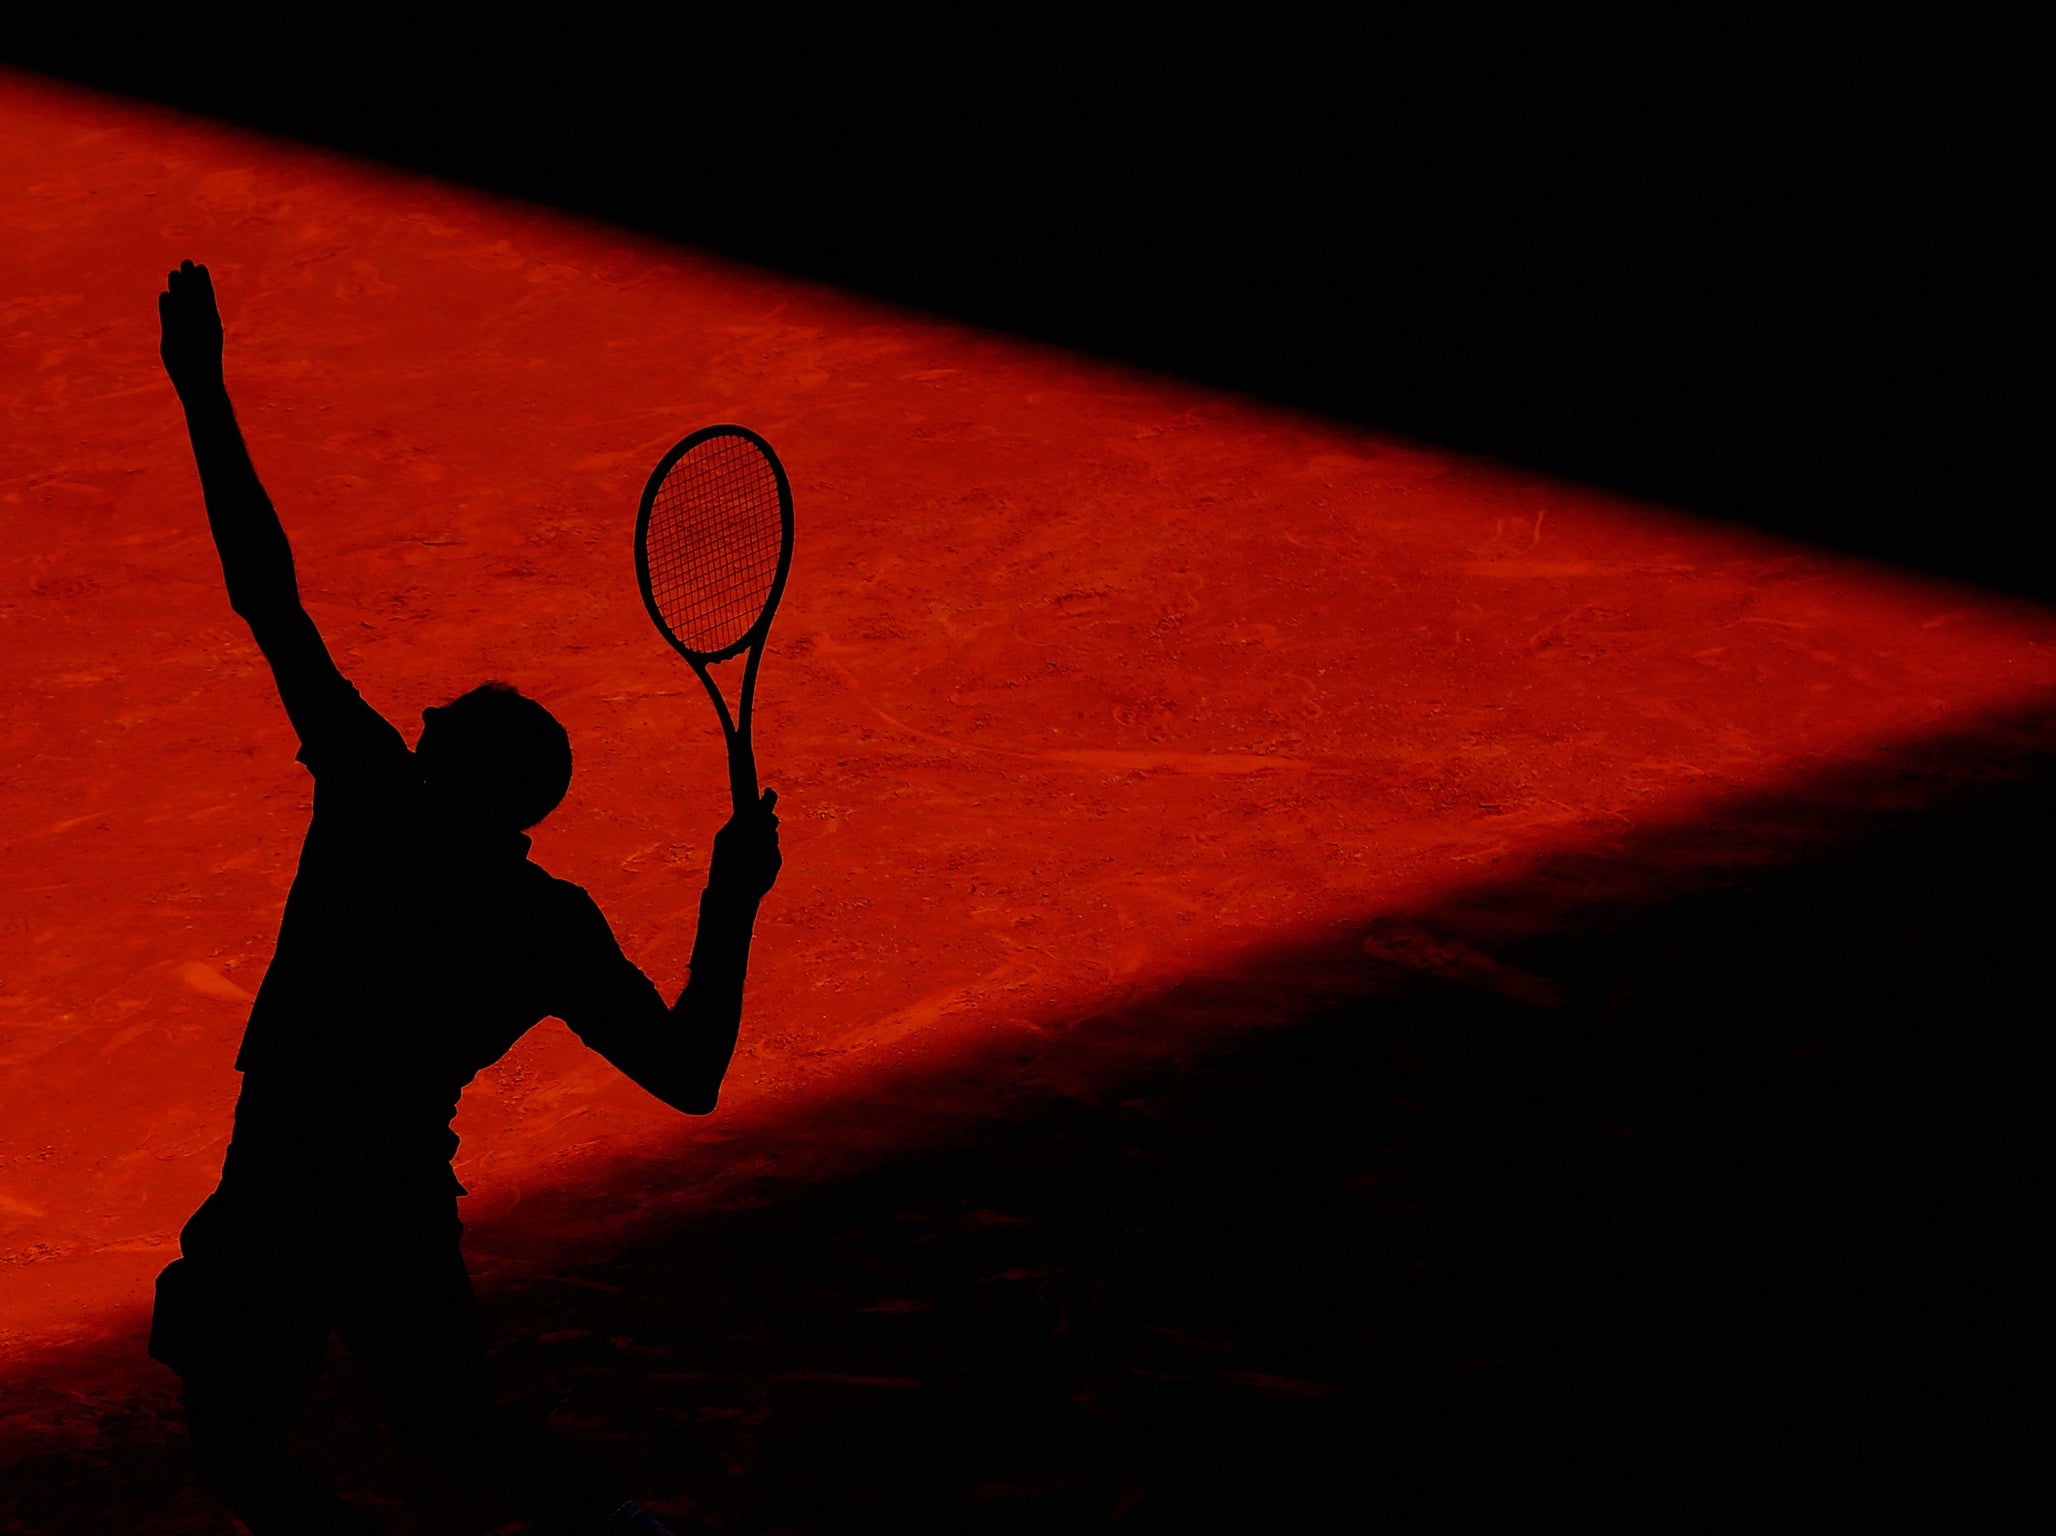 There are fears that not enough is being done to combat match-fixing in sport